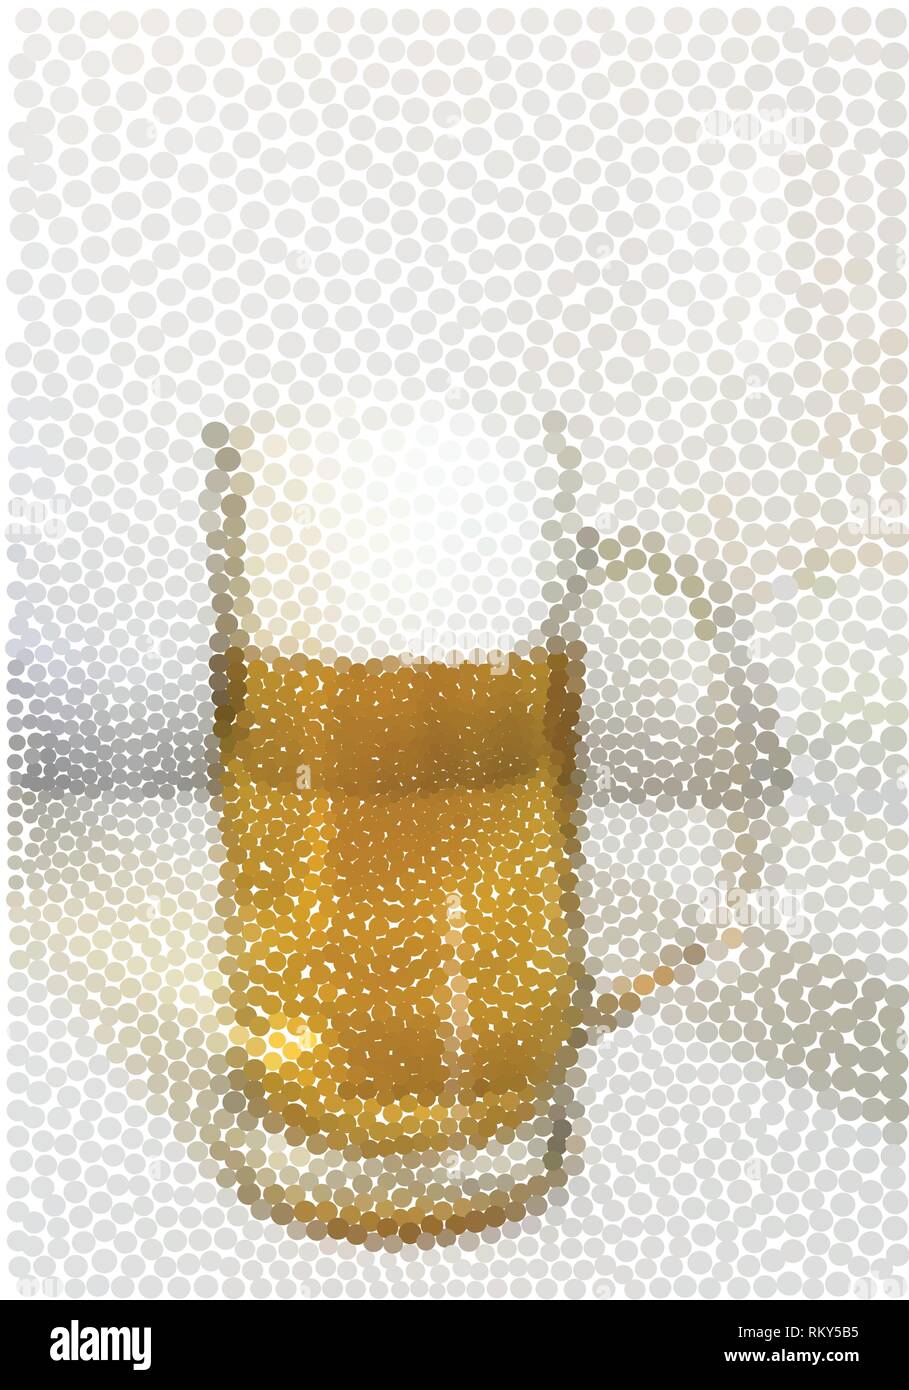 Glass of beer in orange and white dots vector illustration Stock Vector